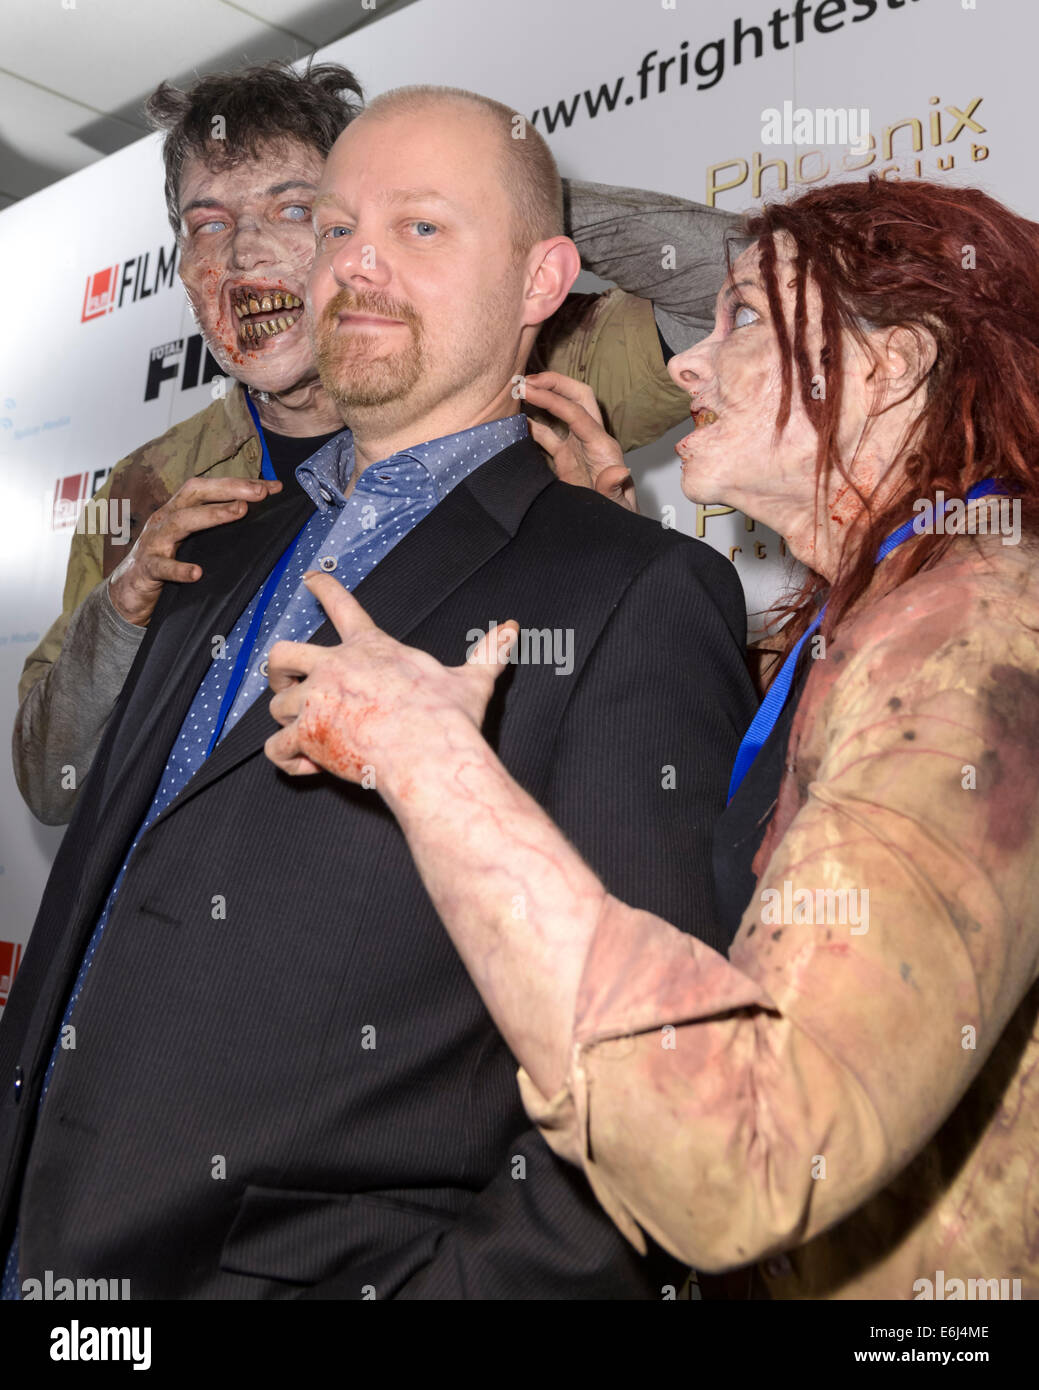 The 15th Film4 Frightfest on 24/08/2014 at The VUE West End, London. The UK premiere of Doc of the Dead, the director attends with 2 zombies. The zombies were provided by Zed Events, each actor was in make-up for 4.5 hours using a standard of prothetics that was used int he film World War Z. Persons pictured: Alexandre O. Philippe. Picture by Julie Edwards Stock Photo